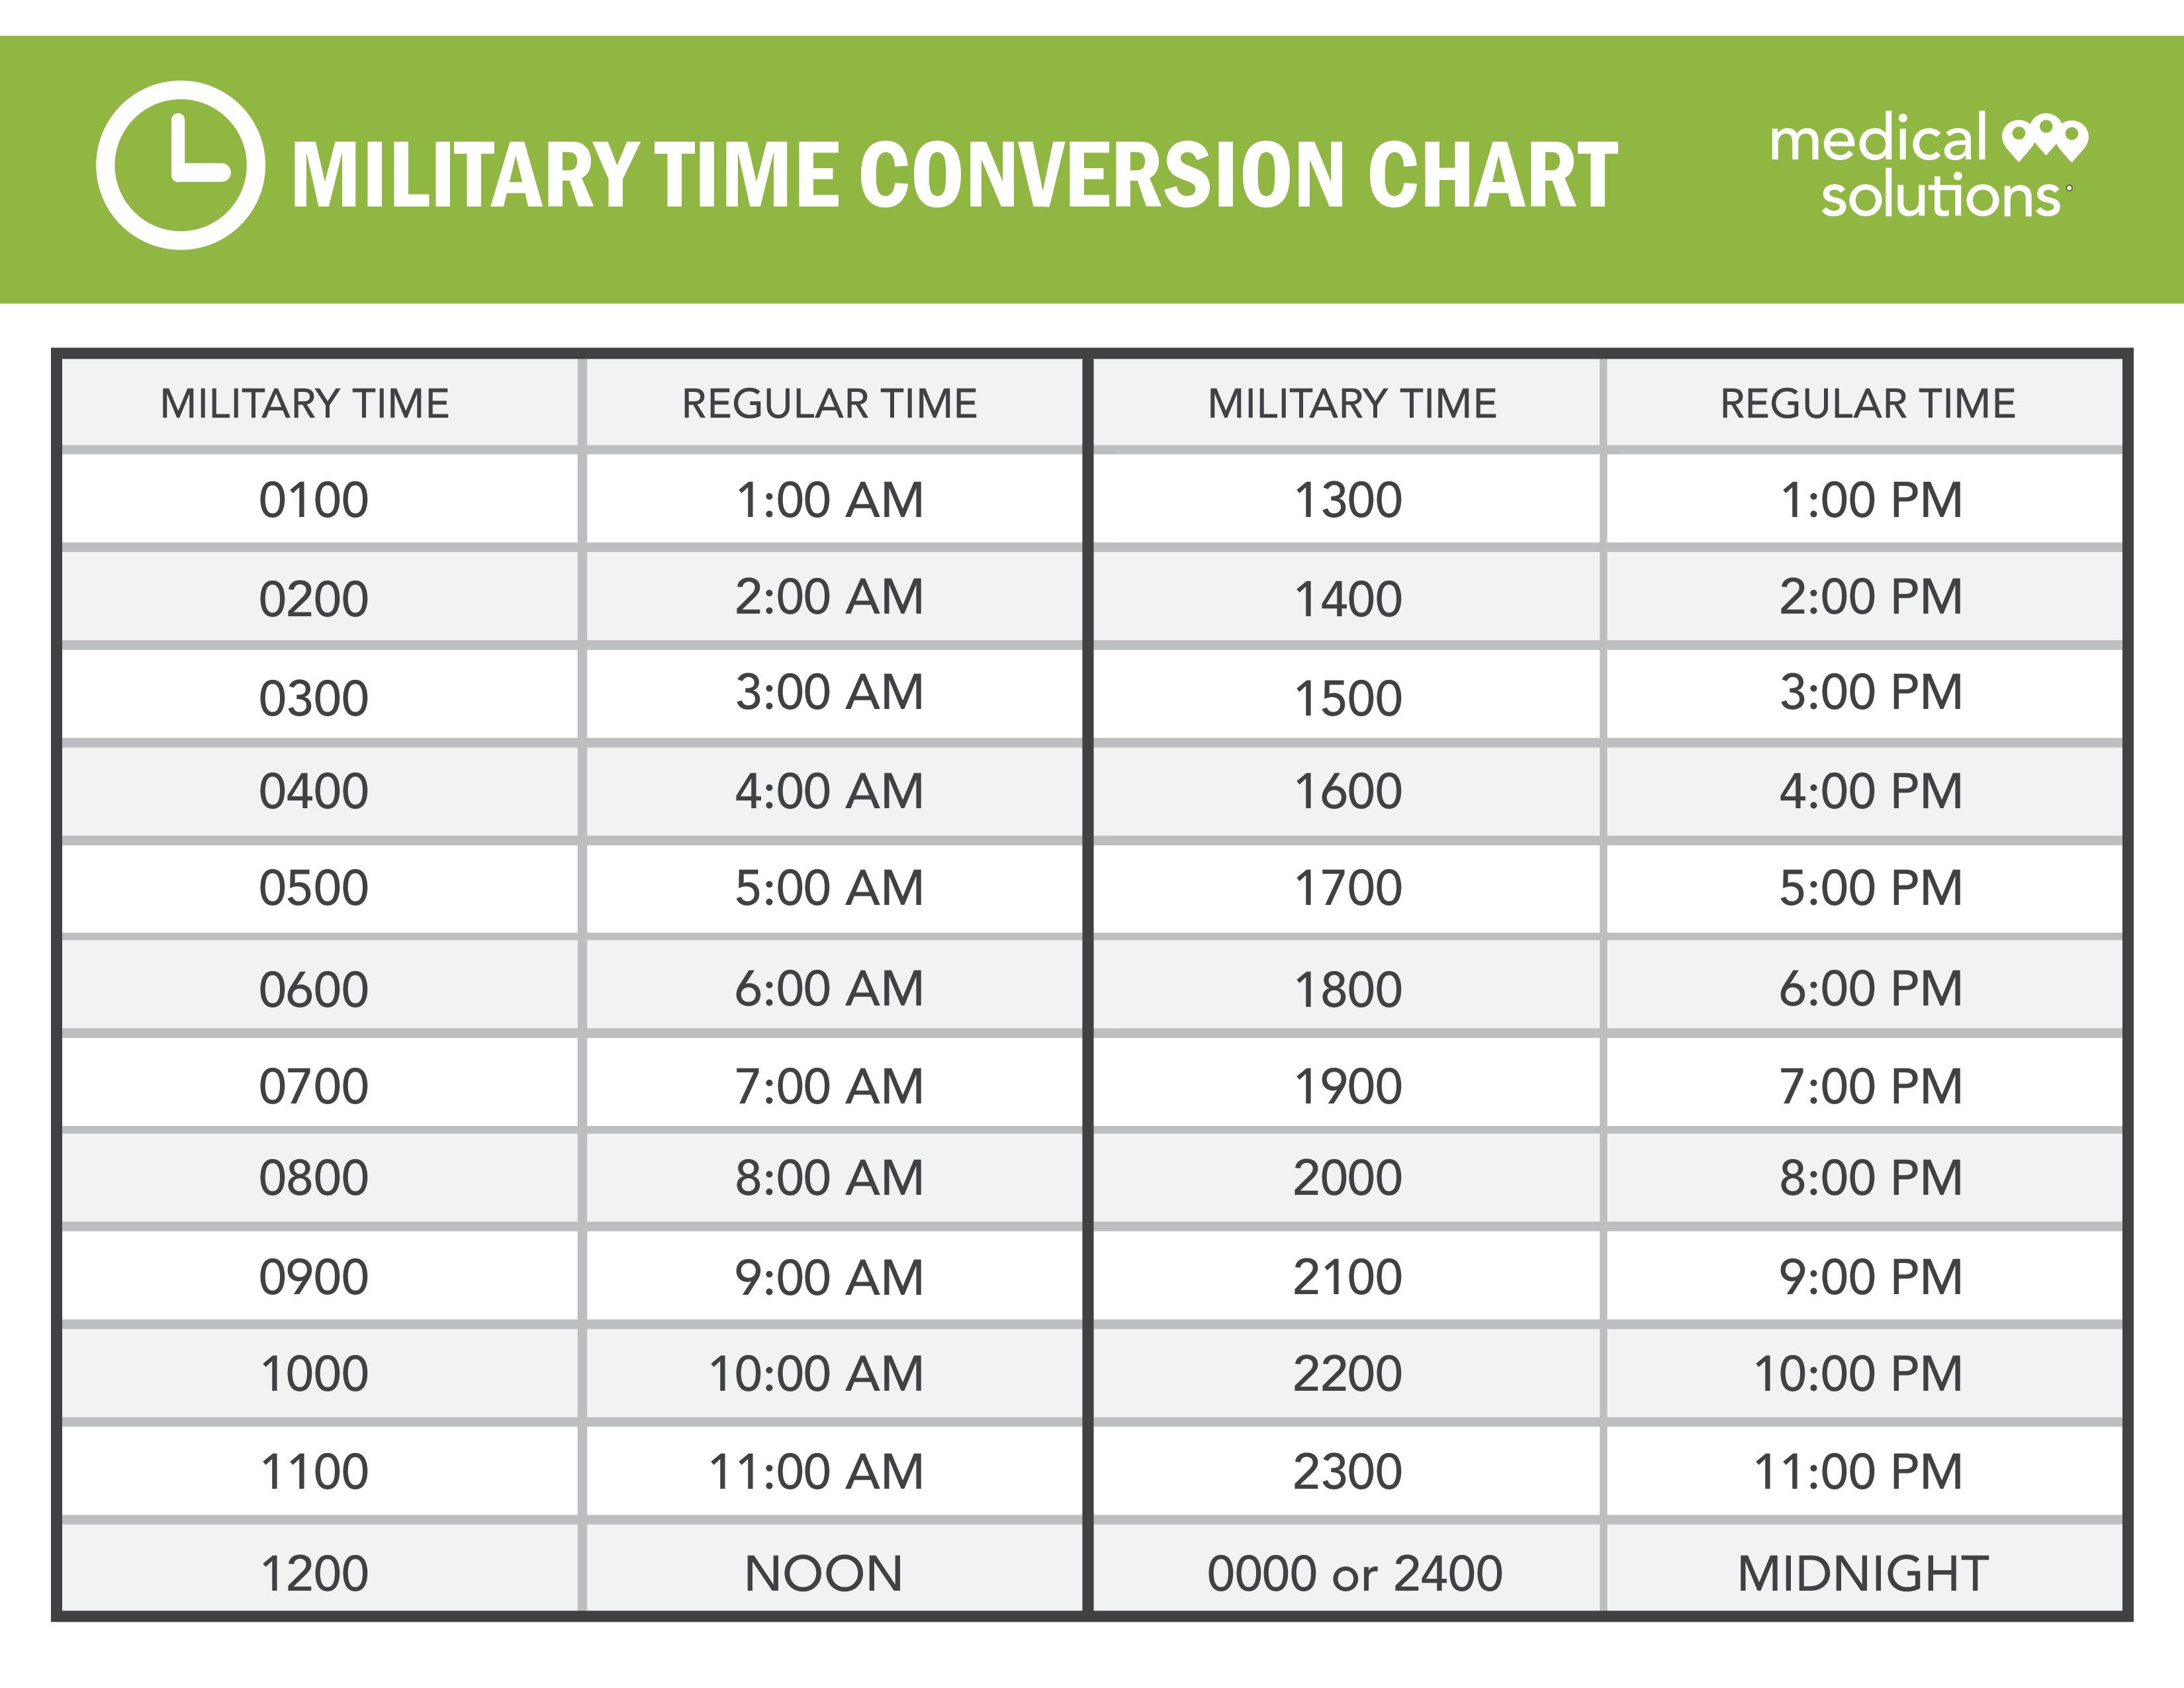 Military Time Conversion Chart Templates at